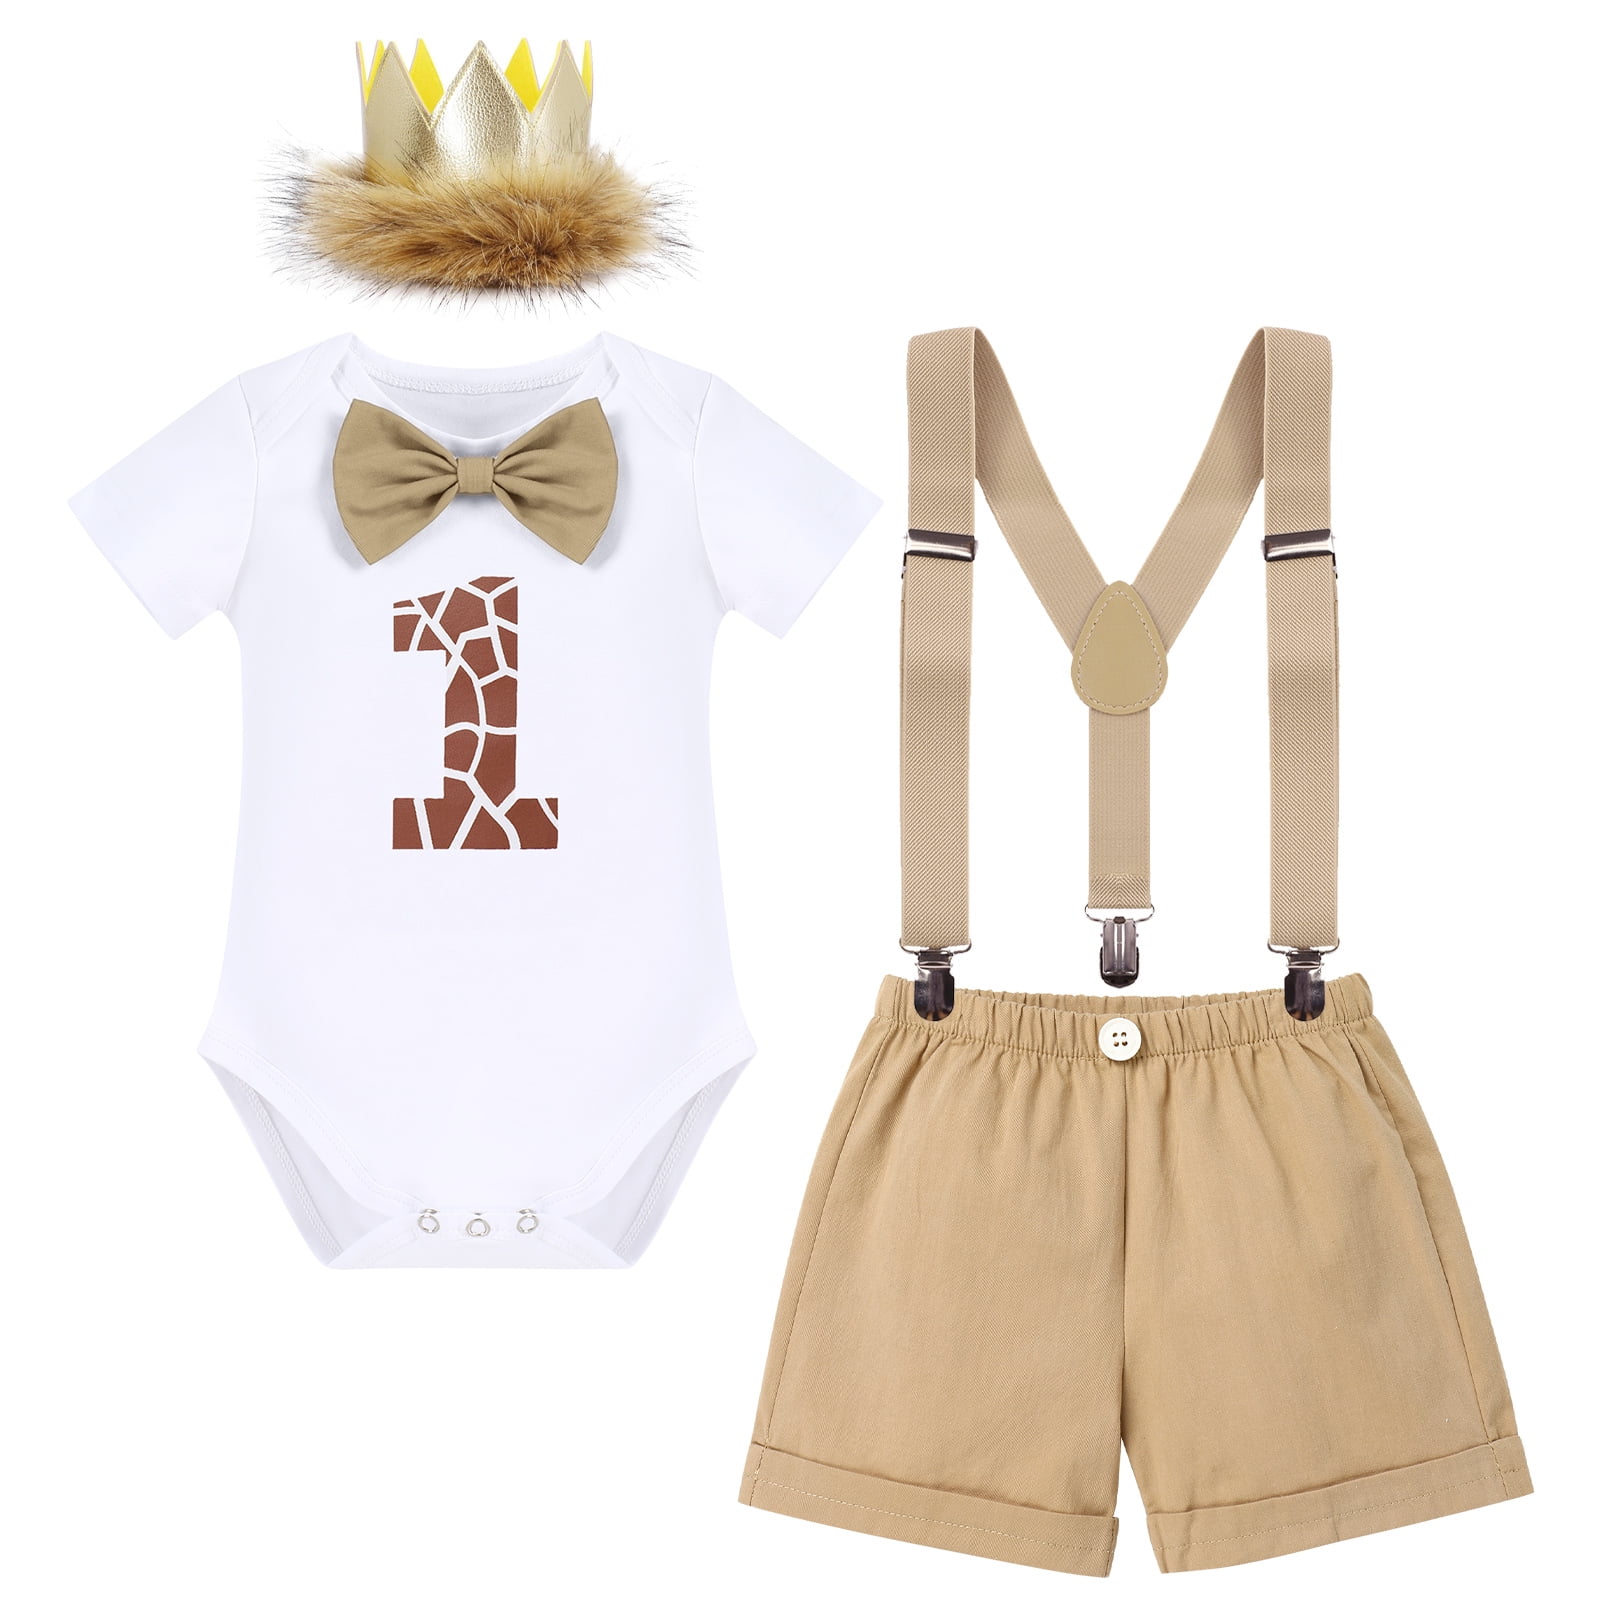 Baby Grow Slogan Novelty Body Suit Baby Bow Tie And Shirt Costume Fancy Dress 